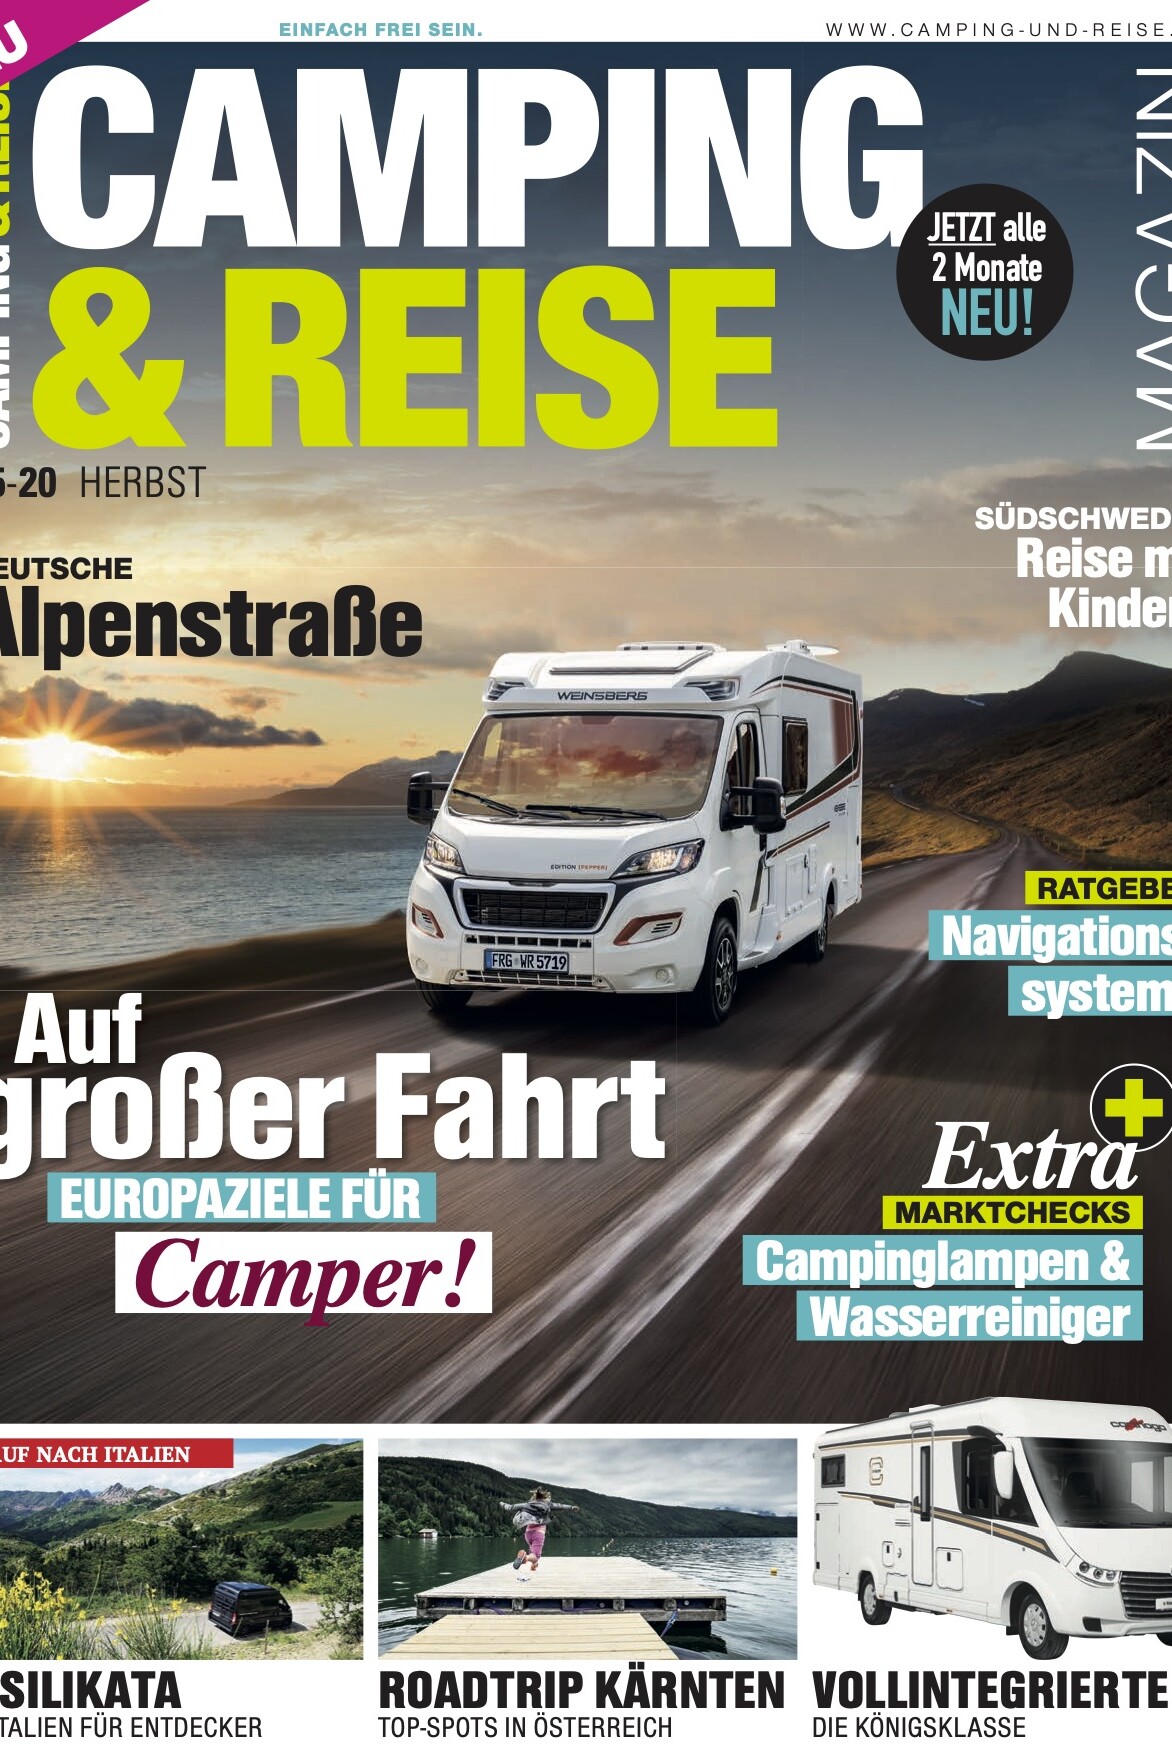 CAMPING&REISE Germania Autunno 2020